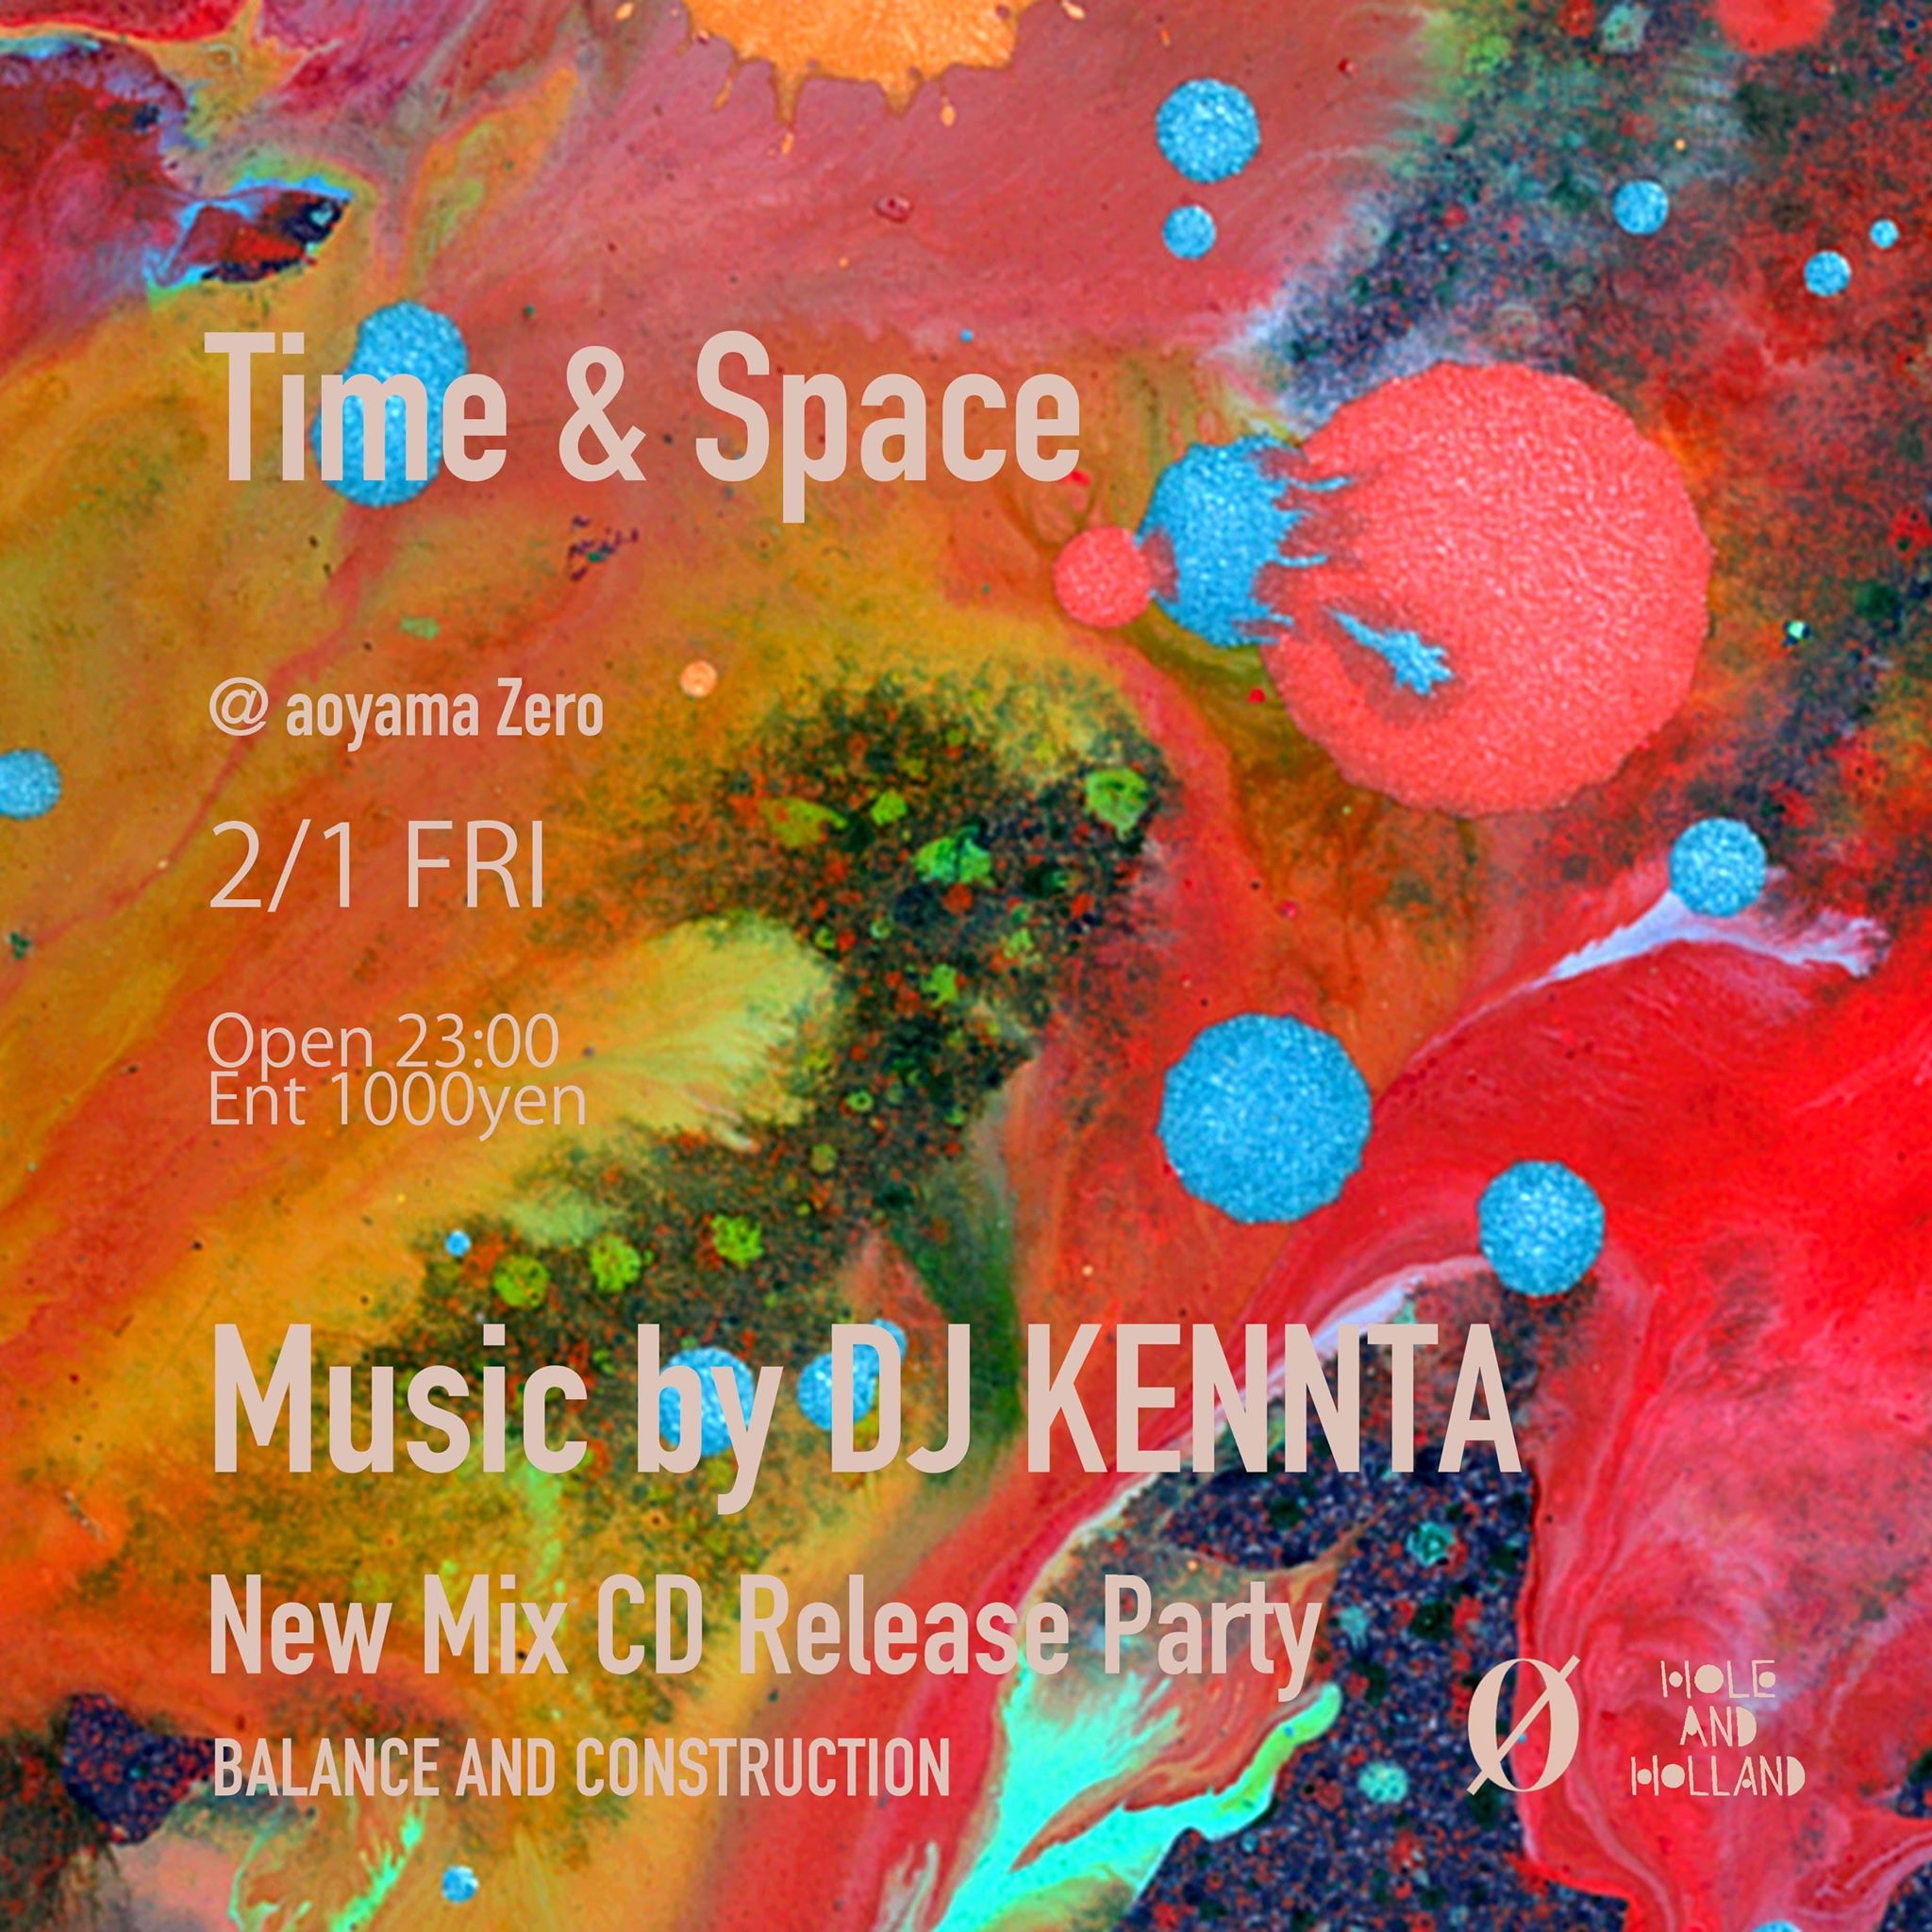 Time & Space “New MixCD Release Party”